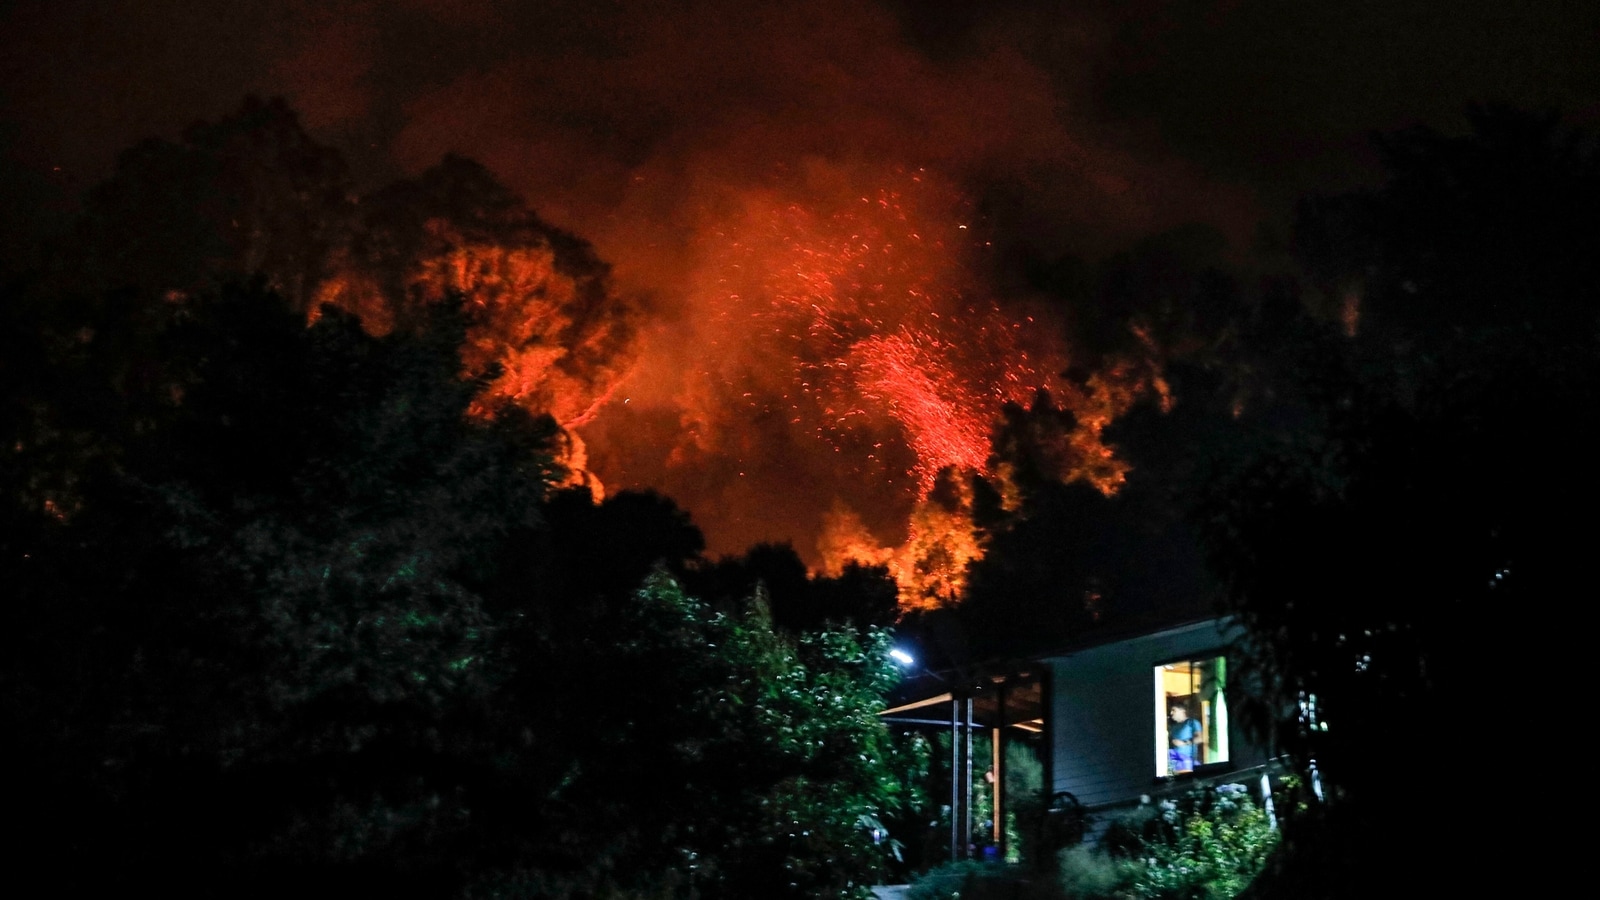 At least 13 killed as Chile struggles to contain raging wildfires